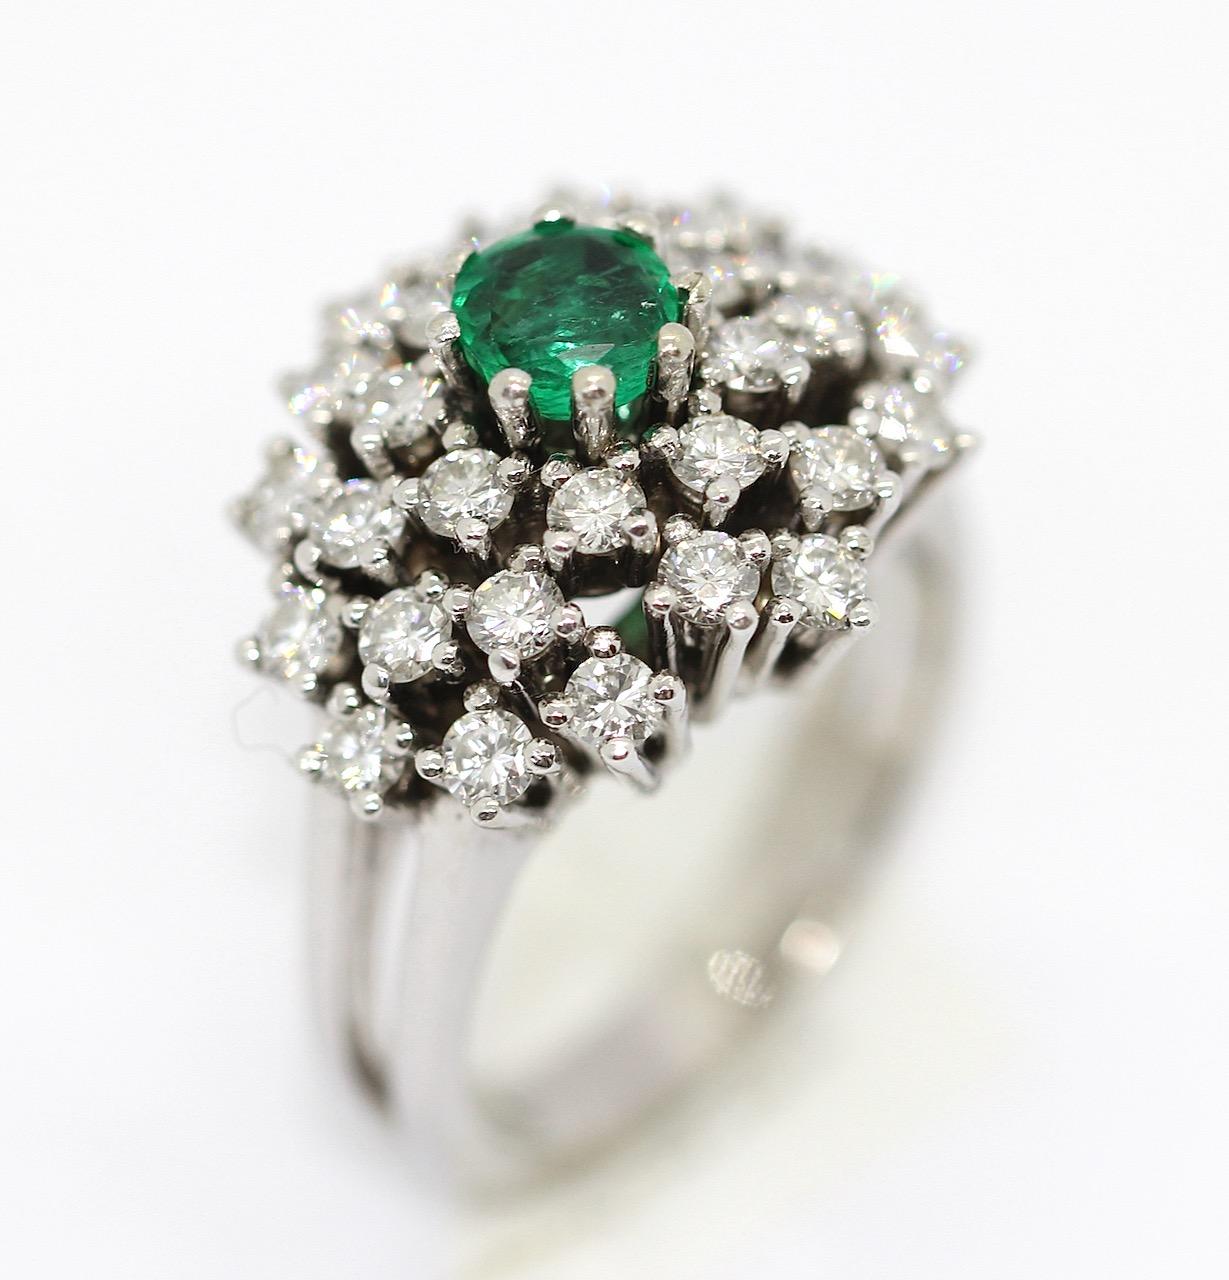 Charming white gold ring with diamonds and emerald. 14 Karat.

Ring is set with countless diamonds of very good quality and an emerald.
Very strong, natural shine of the diamonds.

Includes certificate of authenticity.